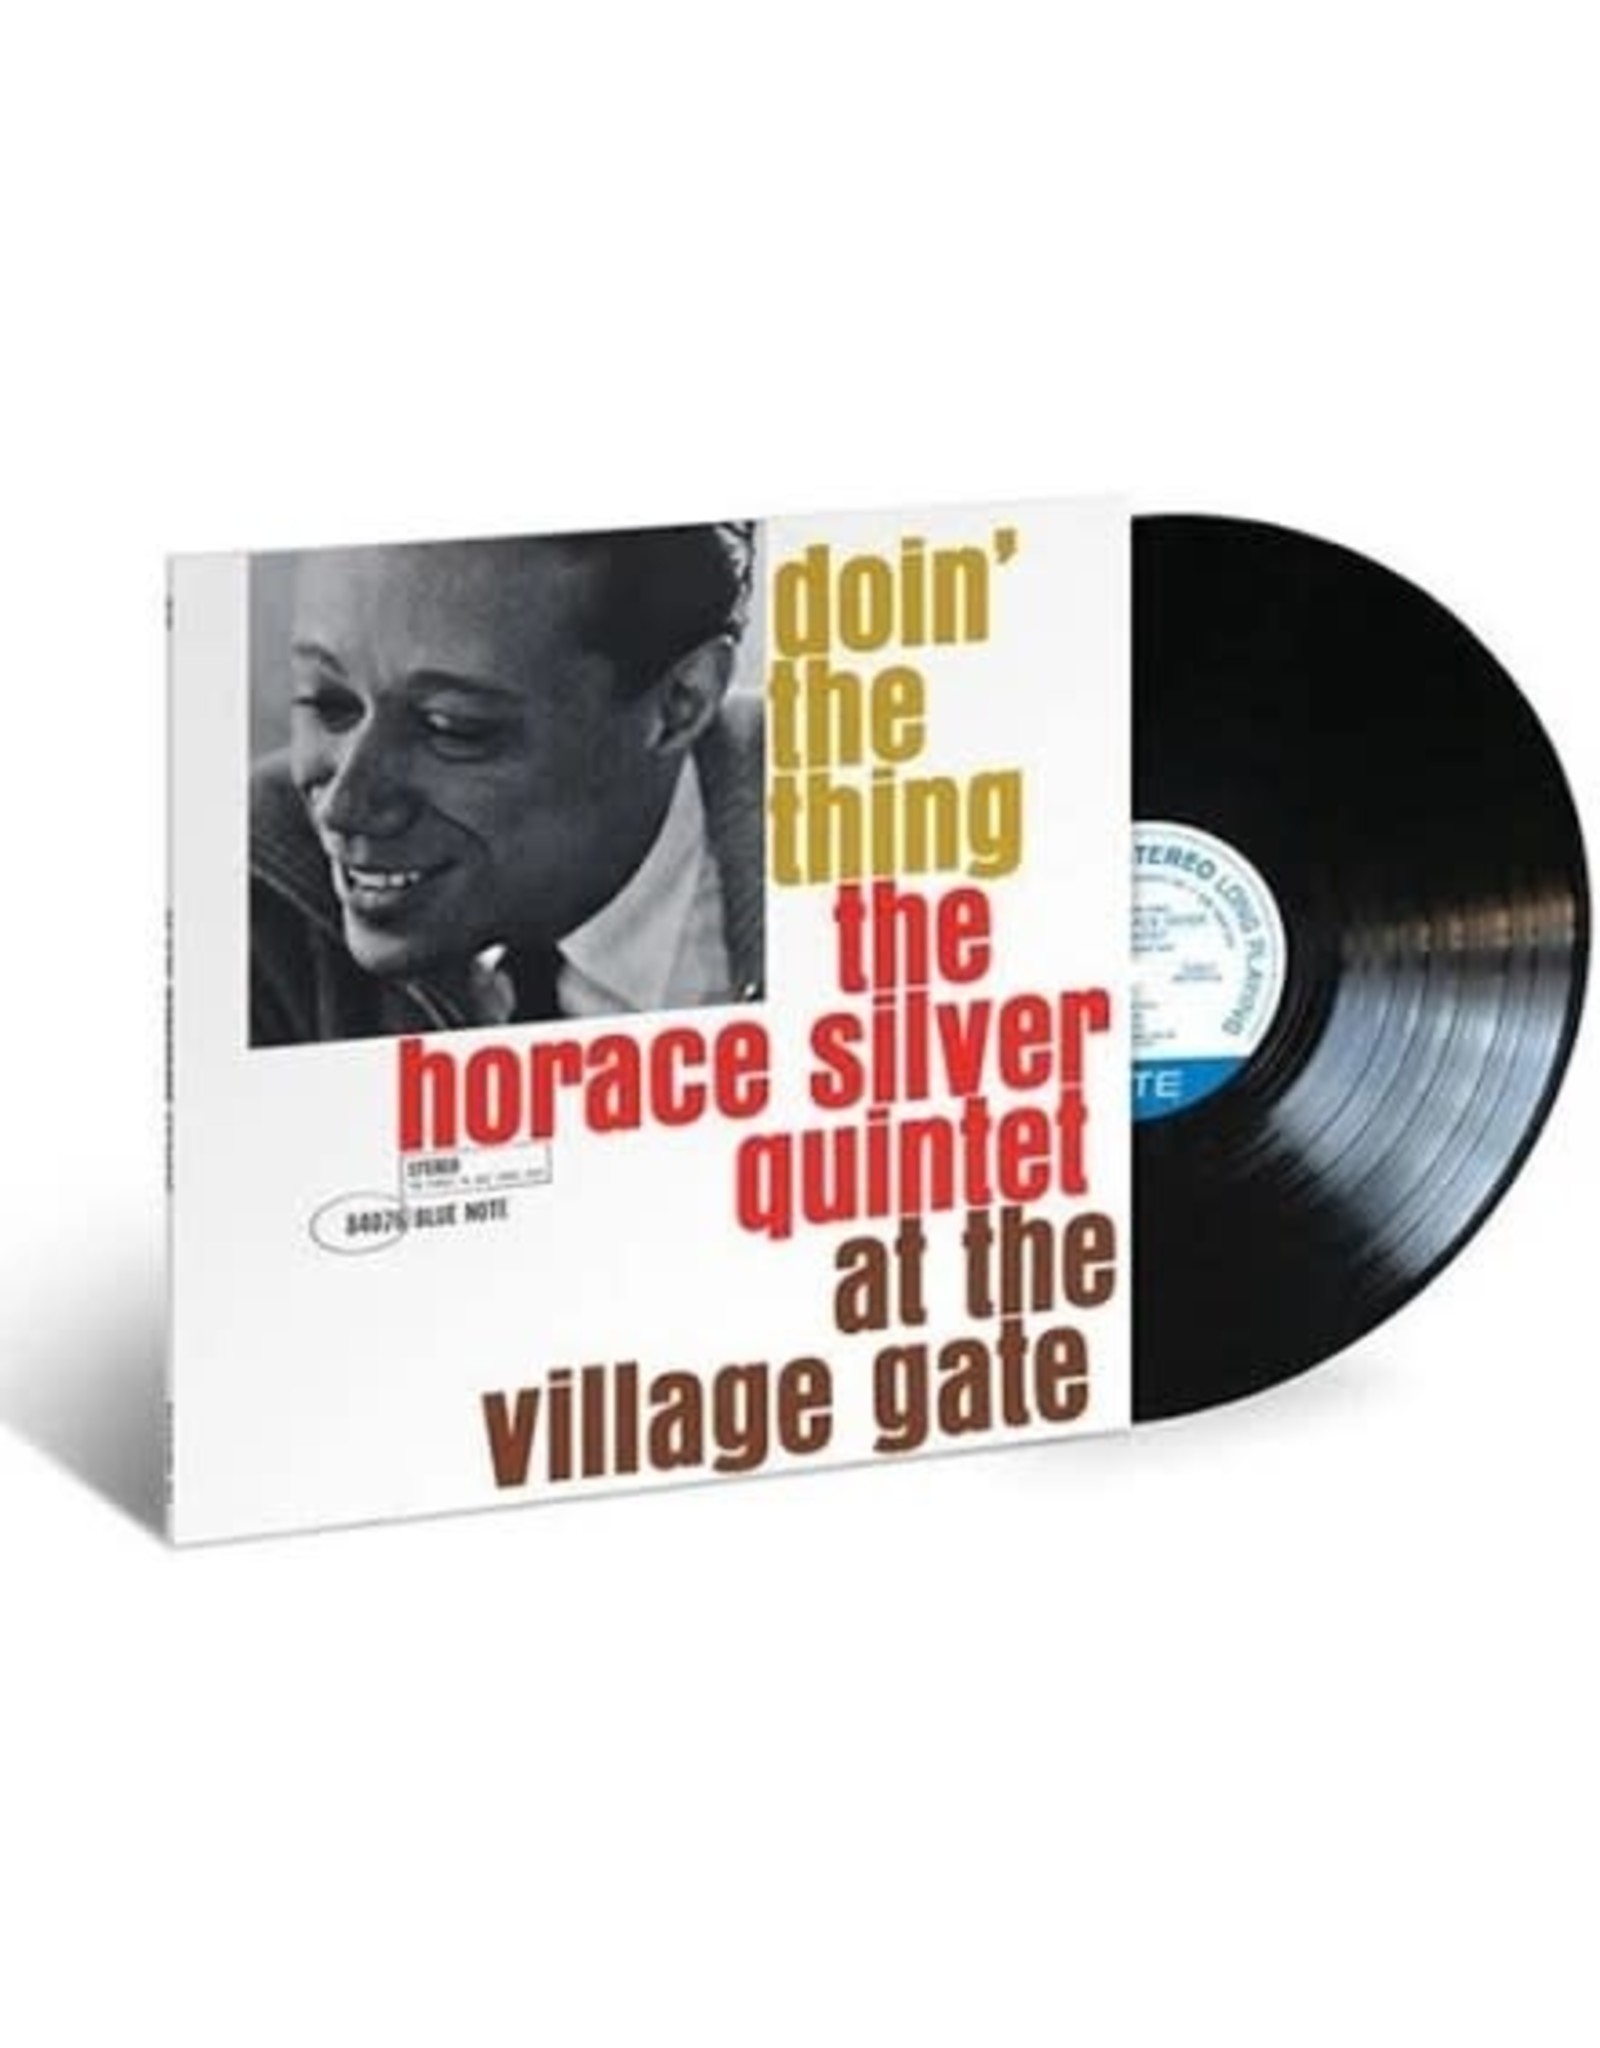 Blue Note Silver, Horace Quintet: Doin' the Thing (Blue Note 80) LP